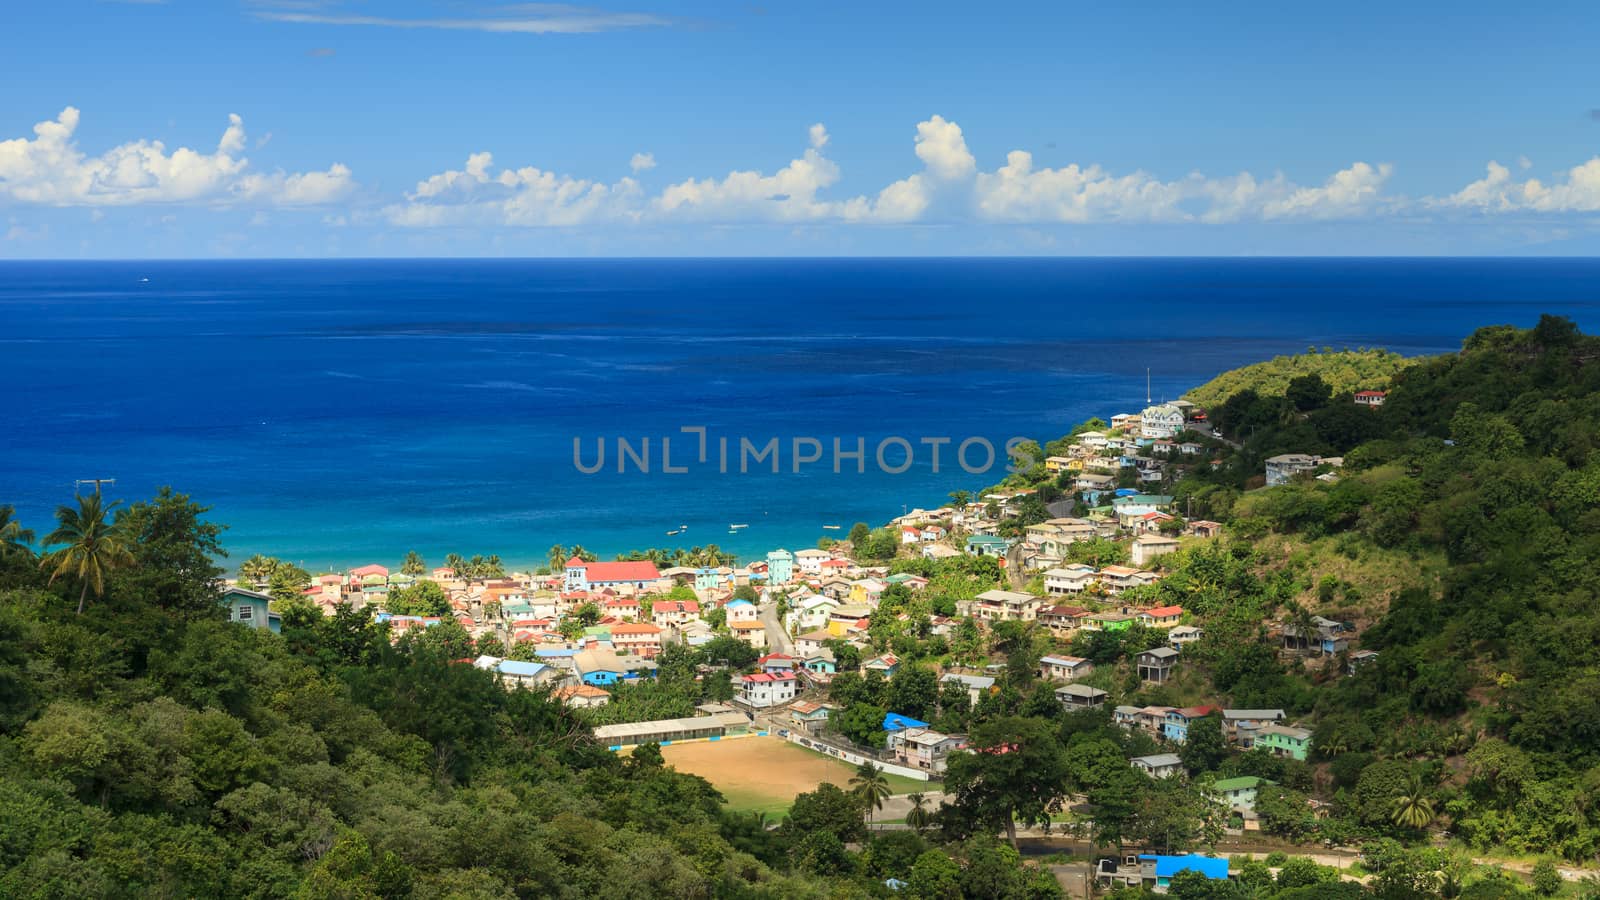 Canaries is a small fishing village on the west coast of the Caribbean island of St Lucia.